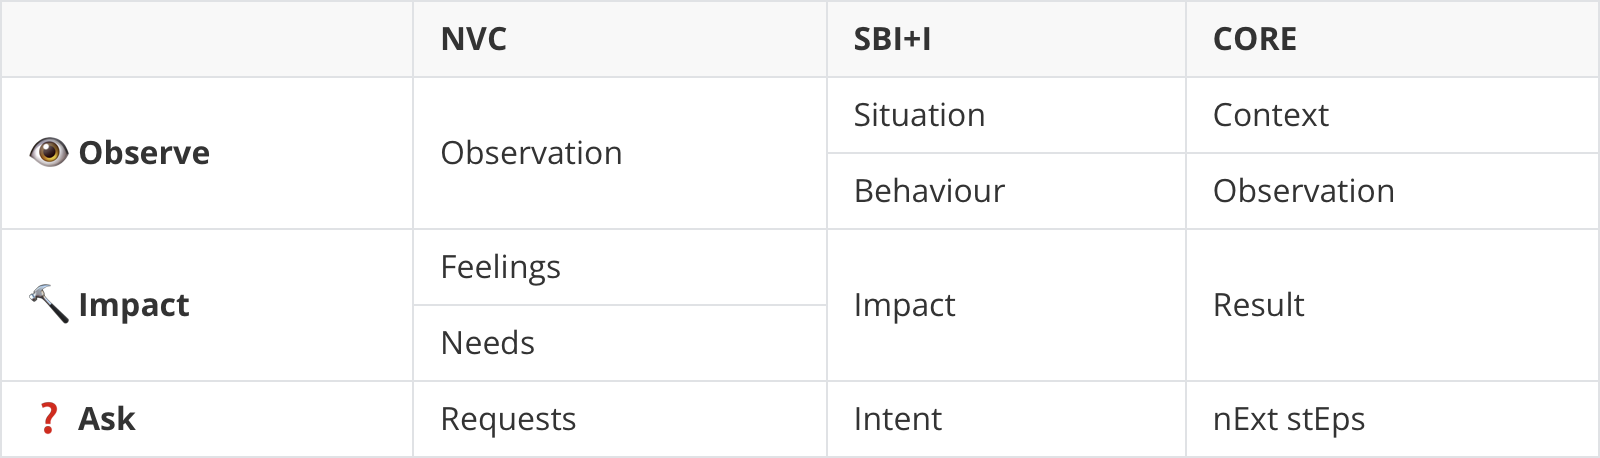 comparison table between the different feedback frameworks (NVC, SBI+I, CORE) to highlight how each one maps to the “Observe”, “Impact” and “Ask” principles